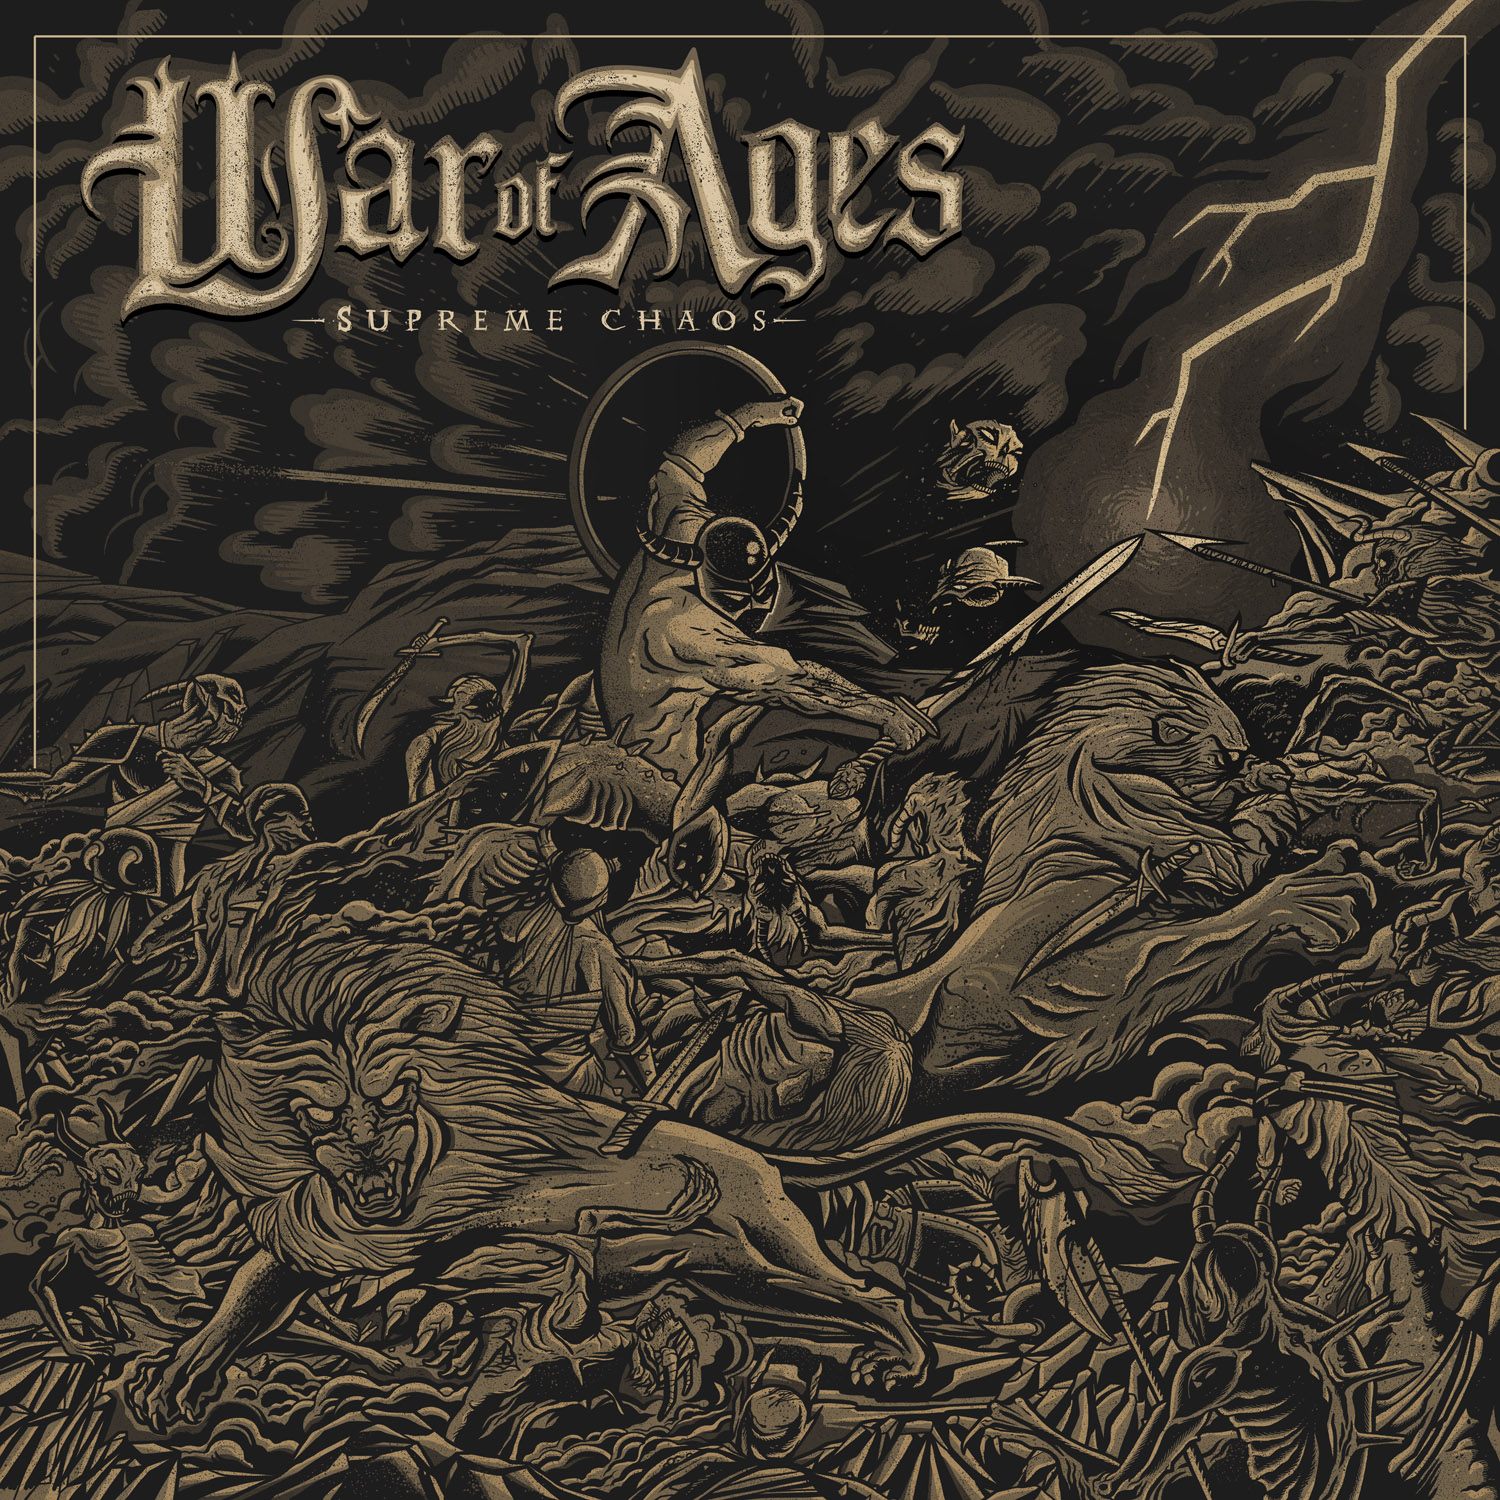 War Of Ages – Supreme chaos